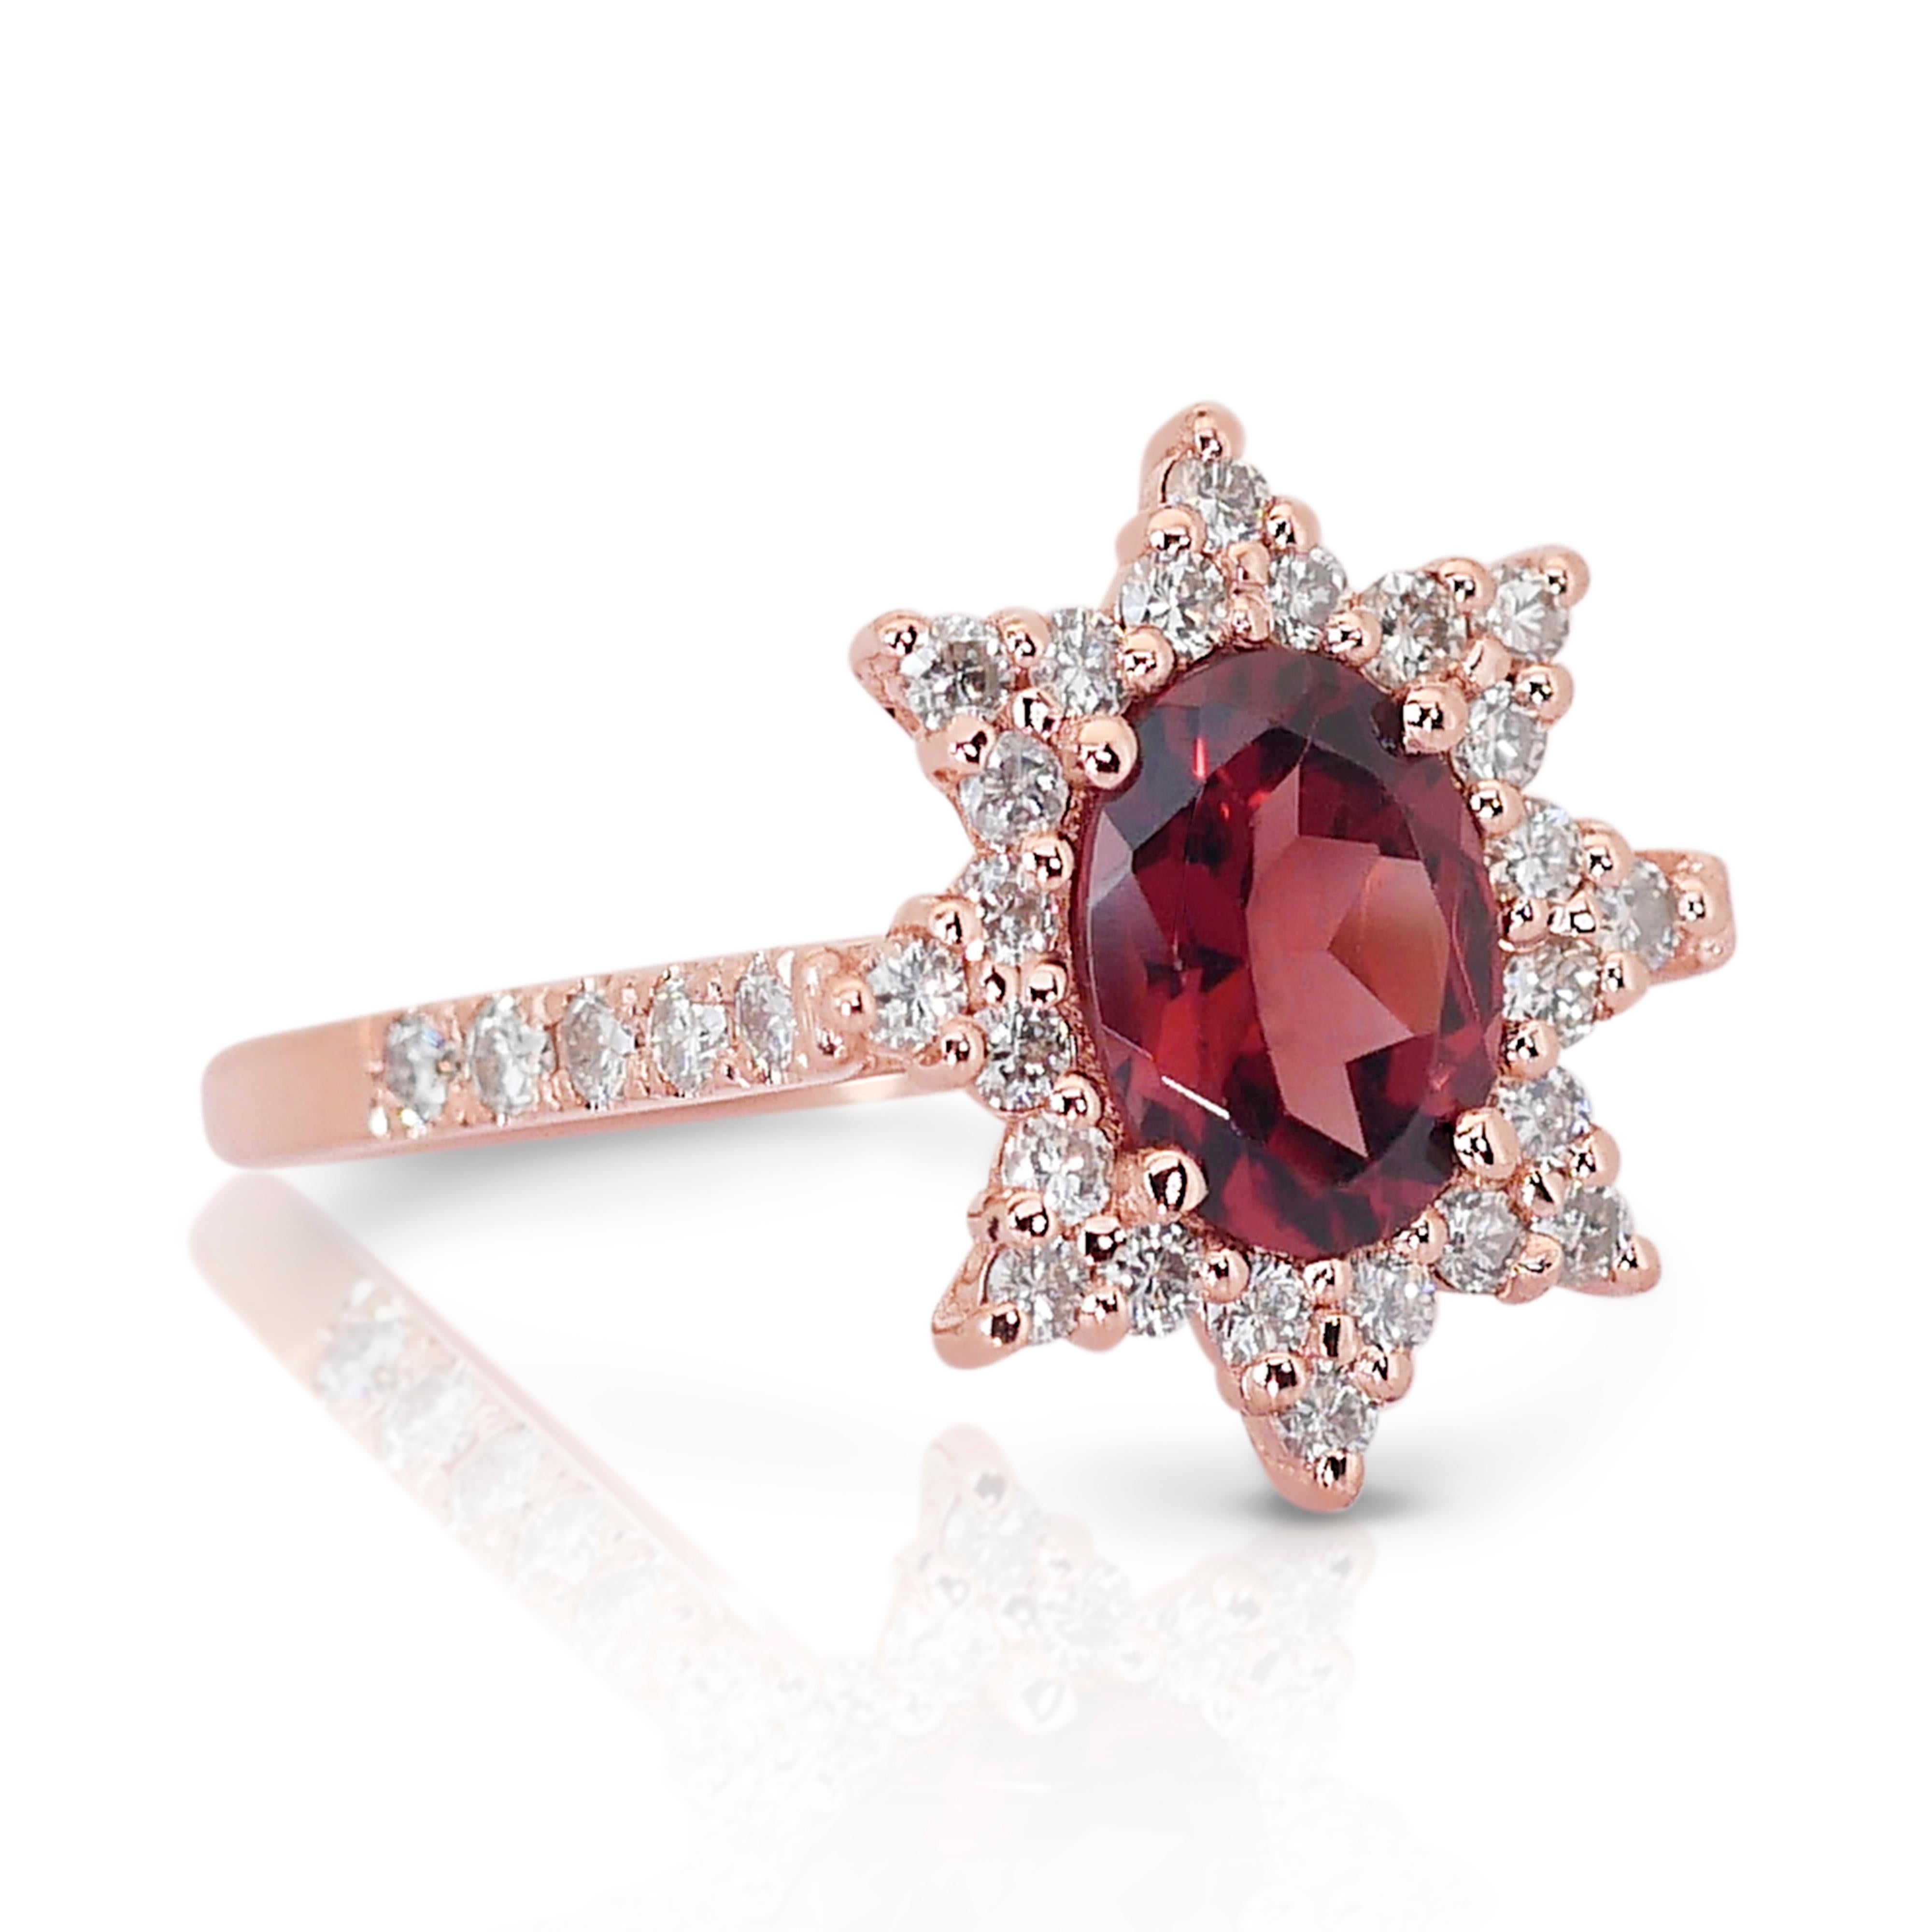 Oval Cut Captivating 14k Rose Gold Garnet and Diamond Halo Ring w/1.87 ct - IGI Certified For Sale